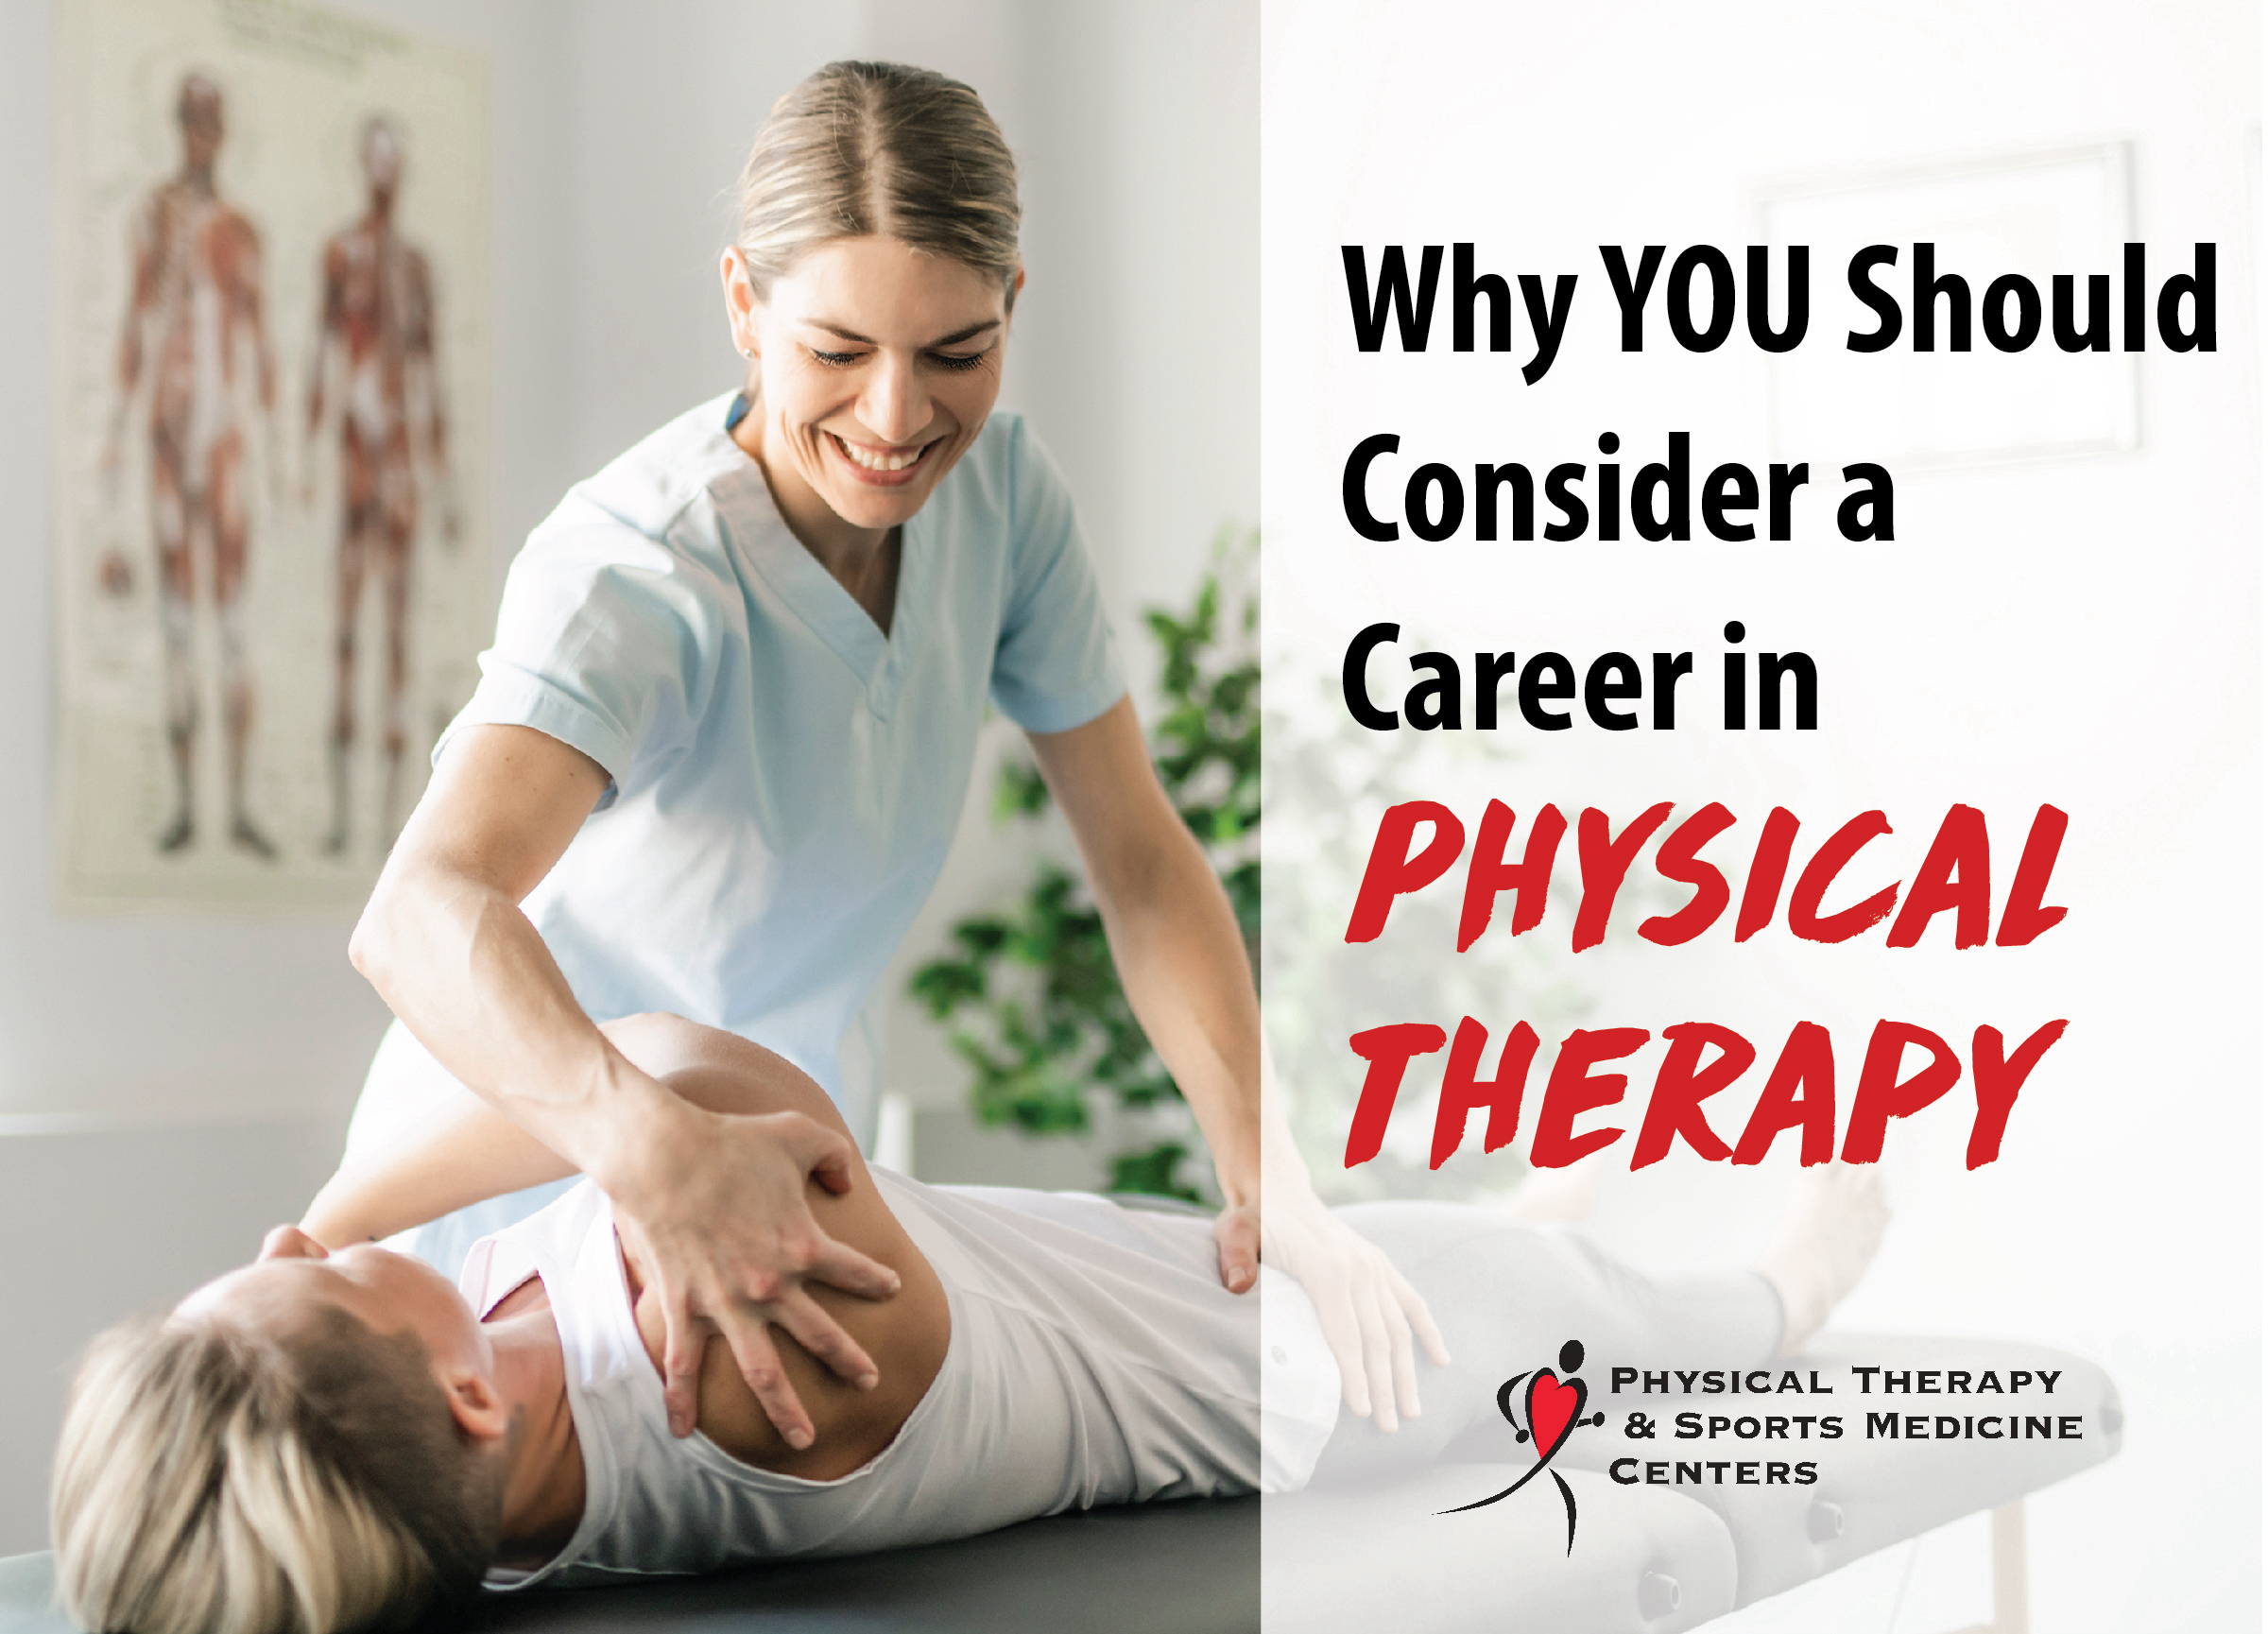 Physical Therapist Performing Manual Therapy | Why You Should Consider a Career in Physical Therapy